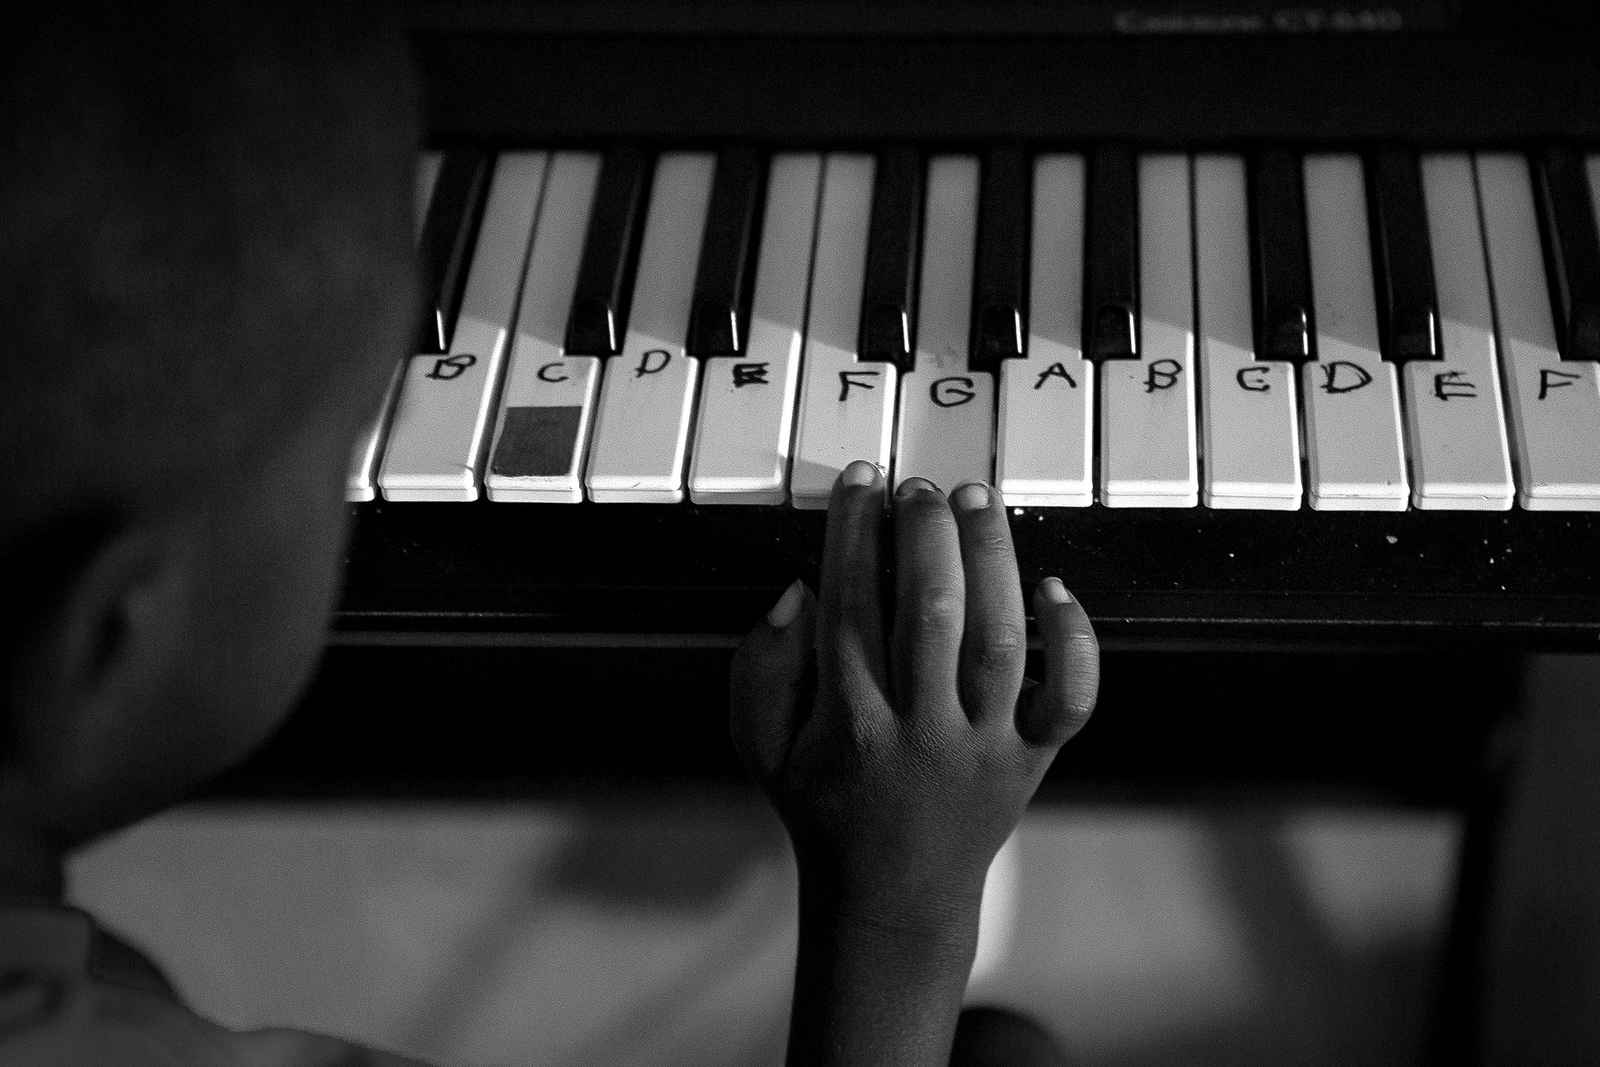  Six-year-old Odarius plays the keyboard and although he does not communicate very much verbally, he can play music and type complicated words and sentences on the computer. 